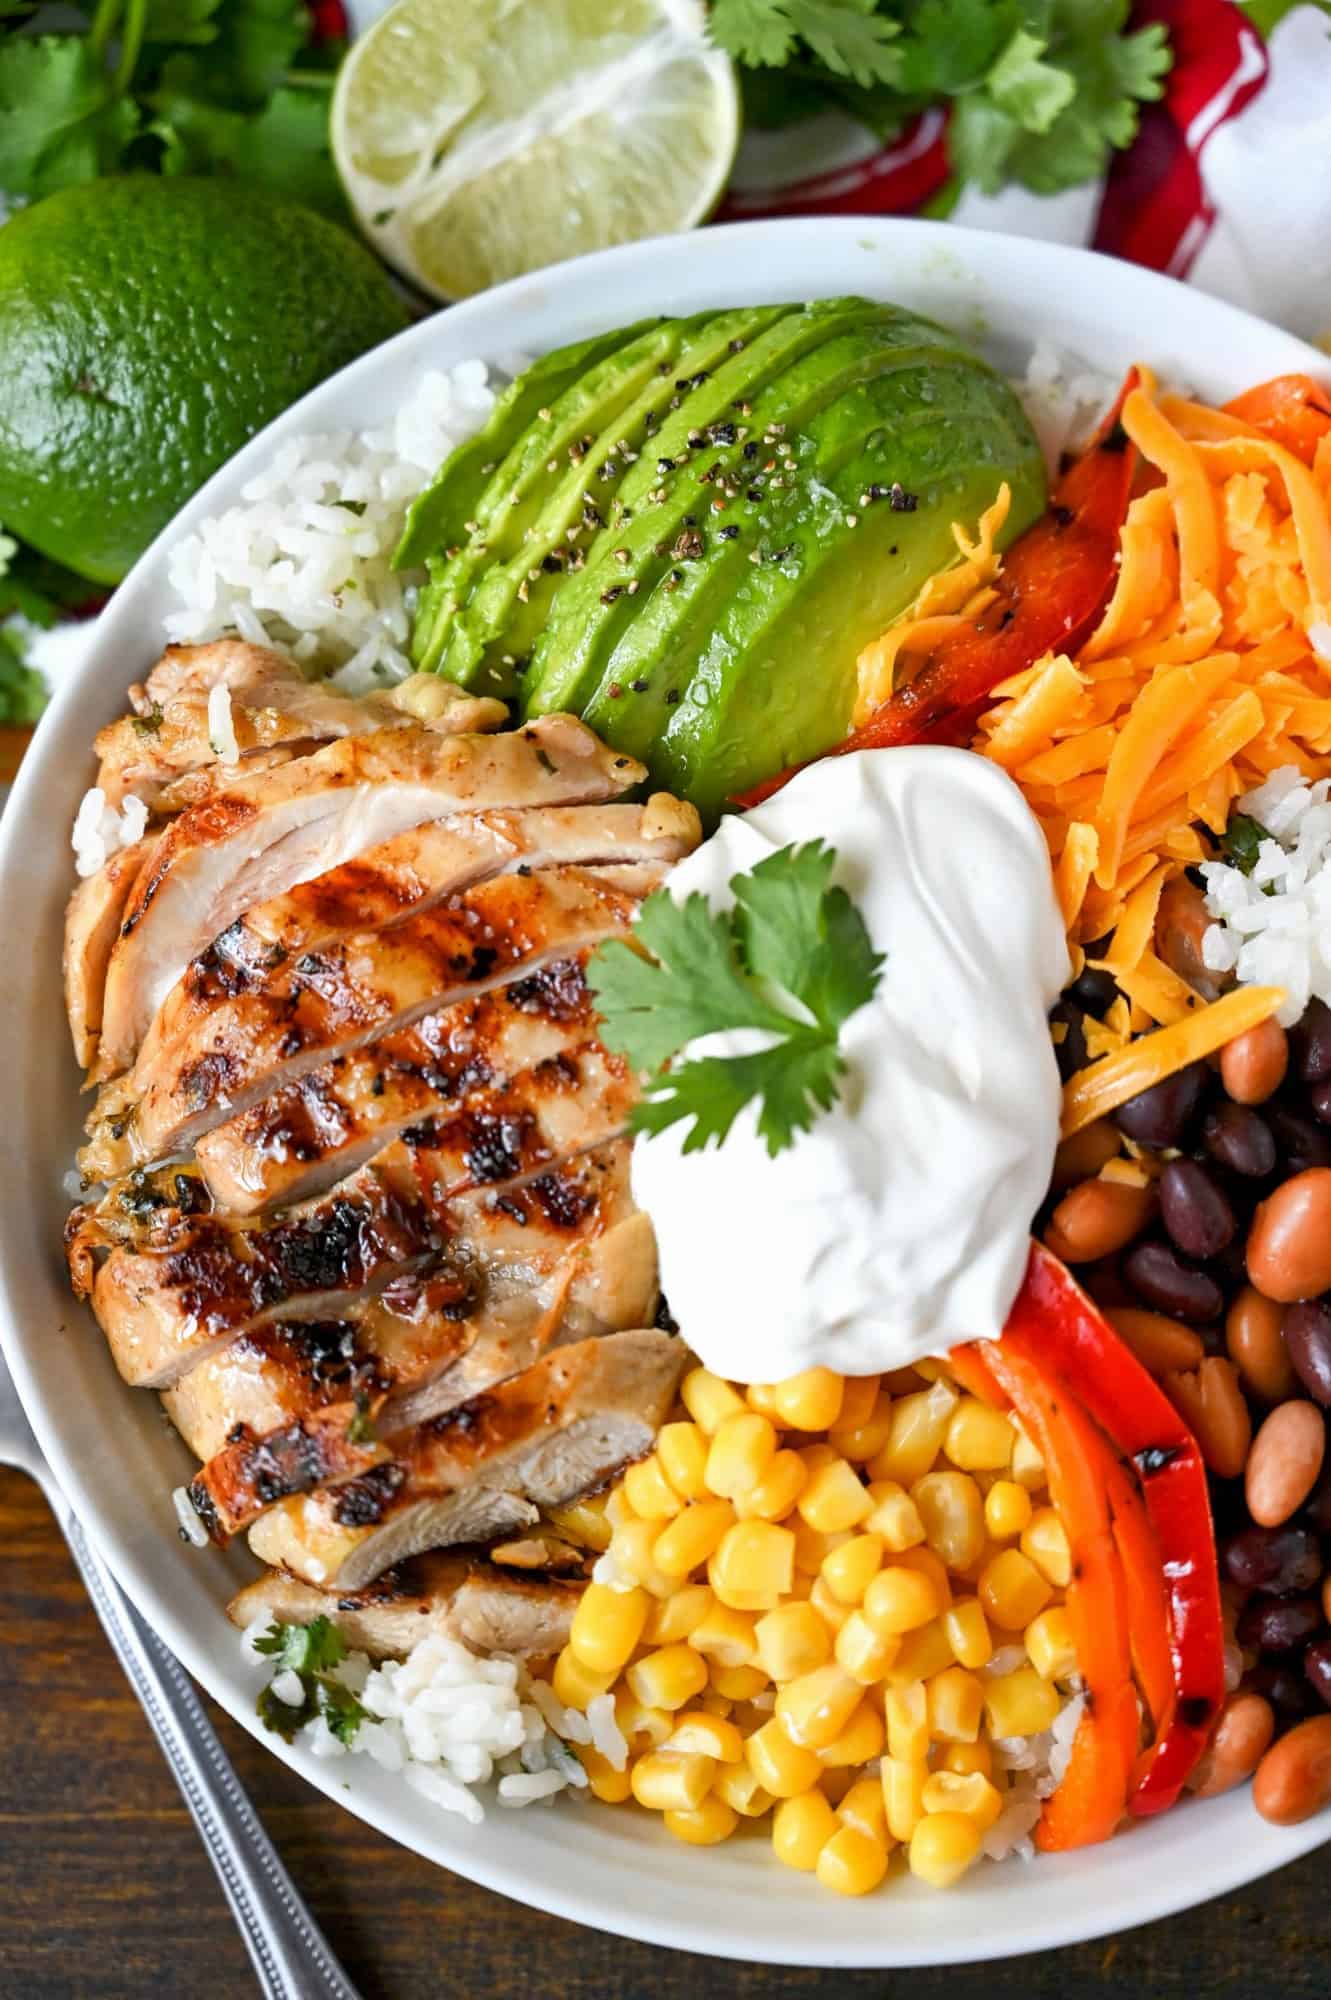 Tequila lime chicken, sliced avocado, scoop of corn, roasted red pepper slices, black beans. All piled on a bed of cilantro rice and a scoop of sour cream in a white bowl.